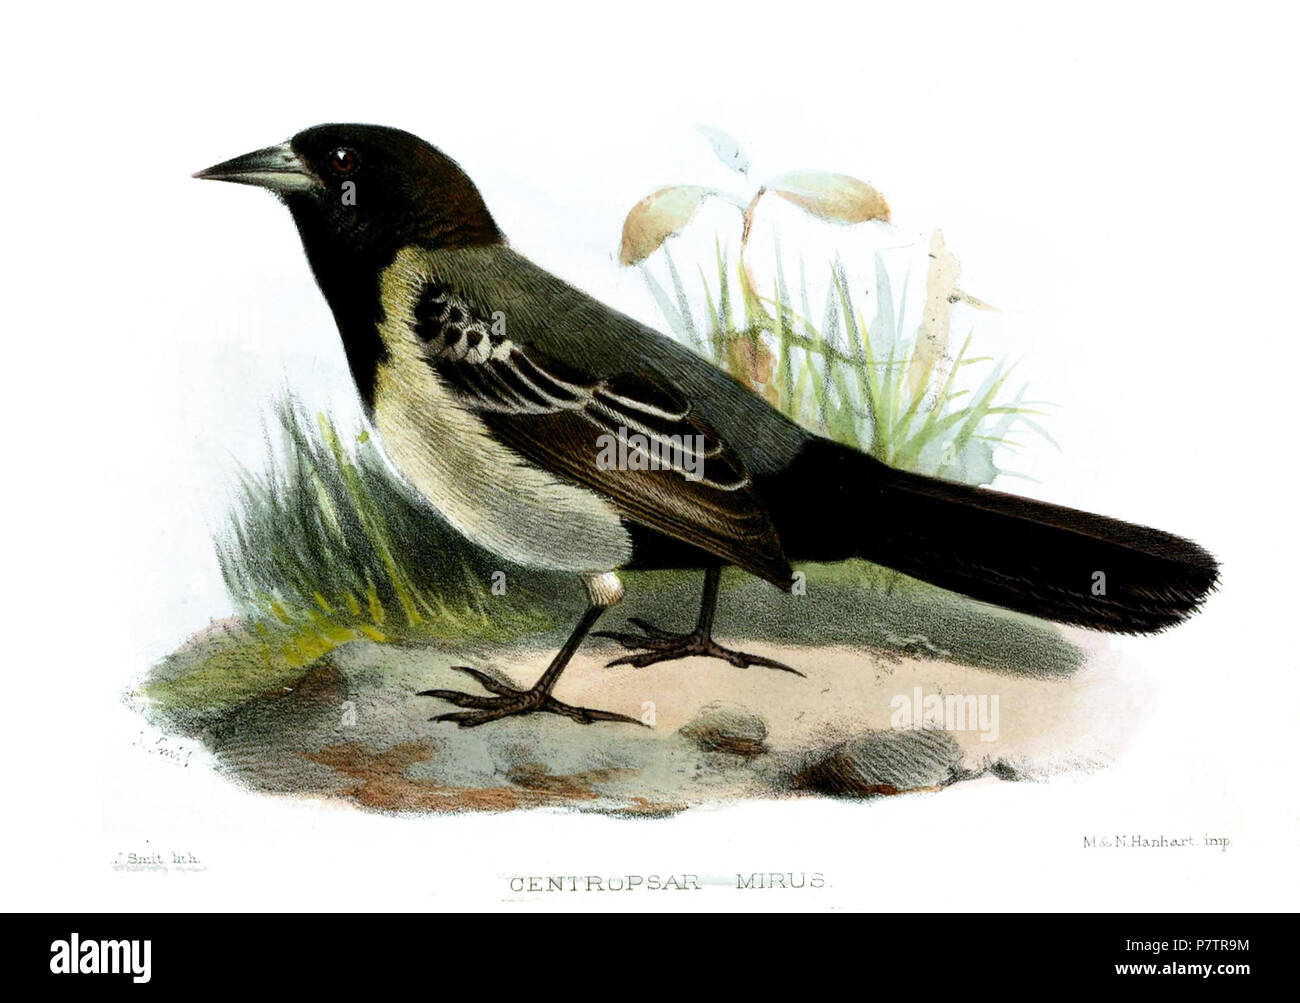 English: A plate accompanying the description of the bird 'Centropsar mirus' by Philip Lutley Sclater in the Proceedings of the Zoological Society of London of 1874. Sclater later found that the type specimen was a made-up specimen, a finding he announced to a meeting of the Zoological Society on 1 June the next year. Nature of 10 June reports on this meeting 'Mr. Sclater exhibited the typical specimen of his Centropsar mirus (P.Z.S. 1874, p. 175, Pl. xxvi.), and stated that on a more careful examination of it he had come to the conclusion that it was a made-up skin.' . 1874 63 CentropsarMirus Stock Photo